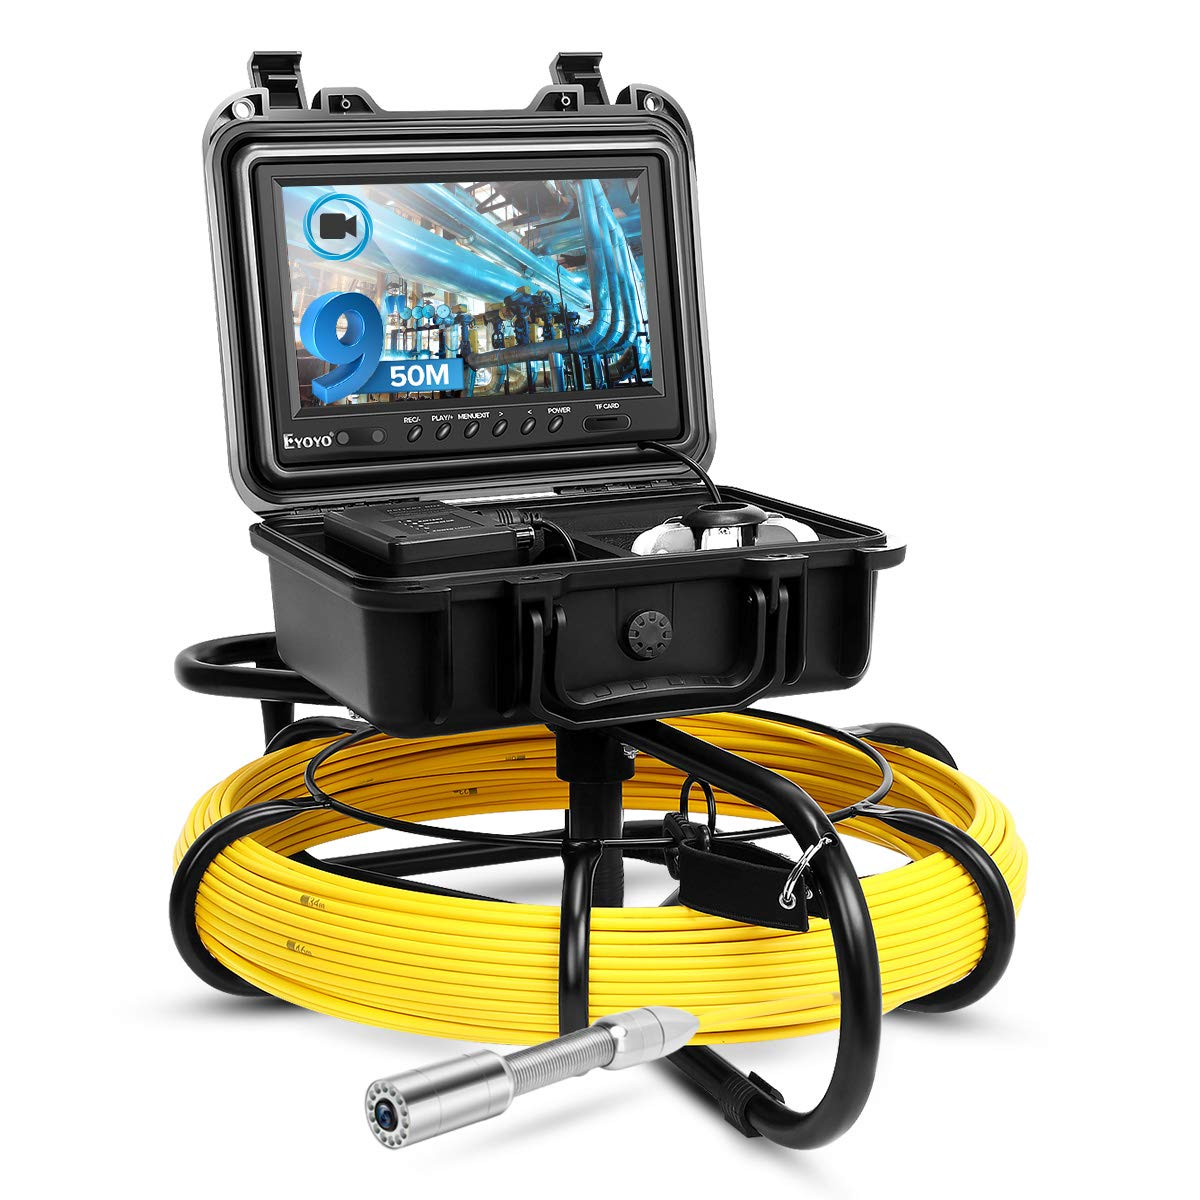 30M 98FT Sewer Waterproof Video Camera 7" LCD Drain Pipe Line Inspection DVR LCD 